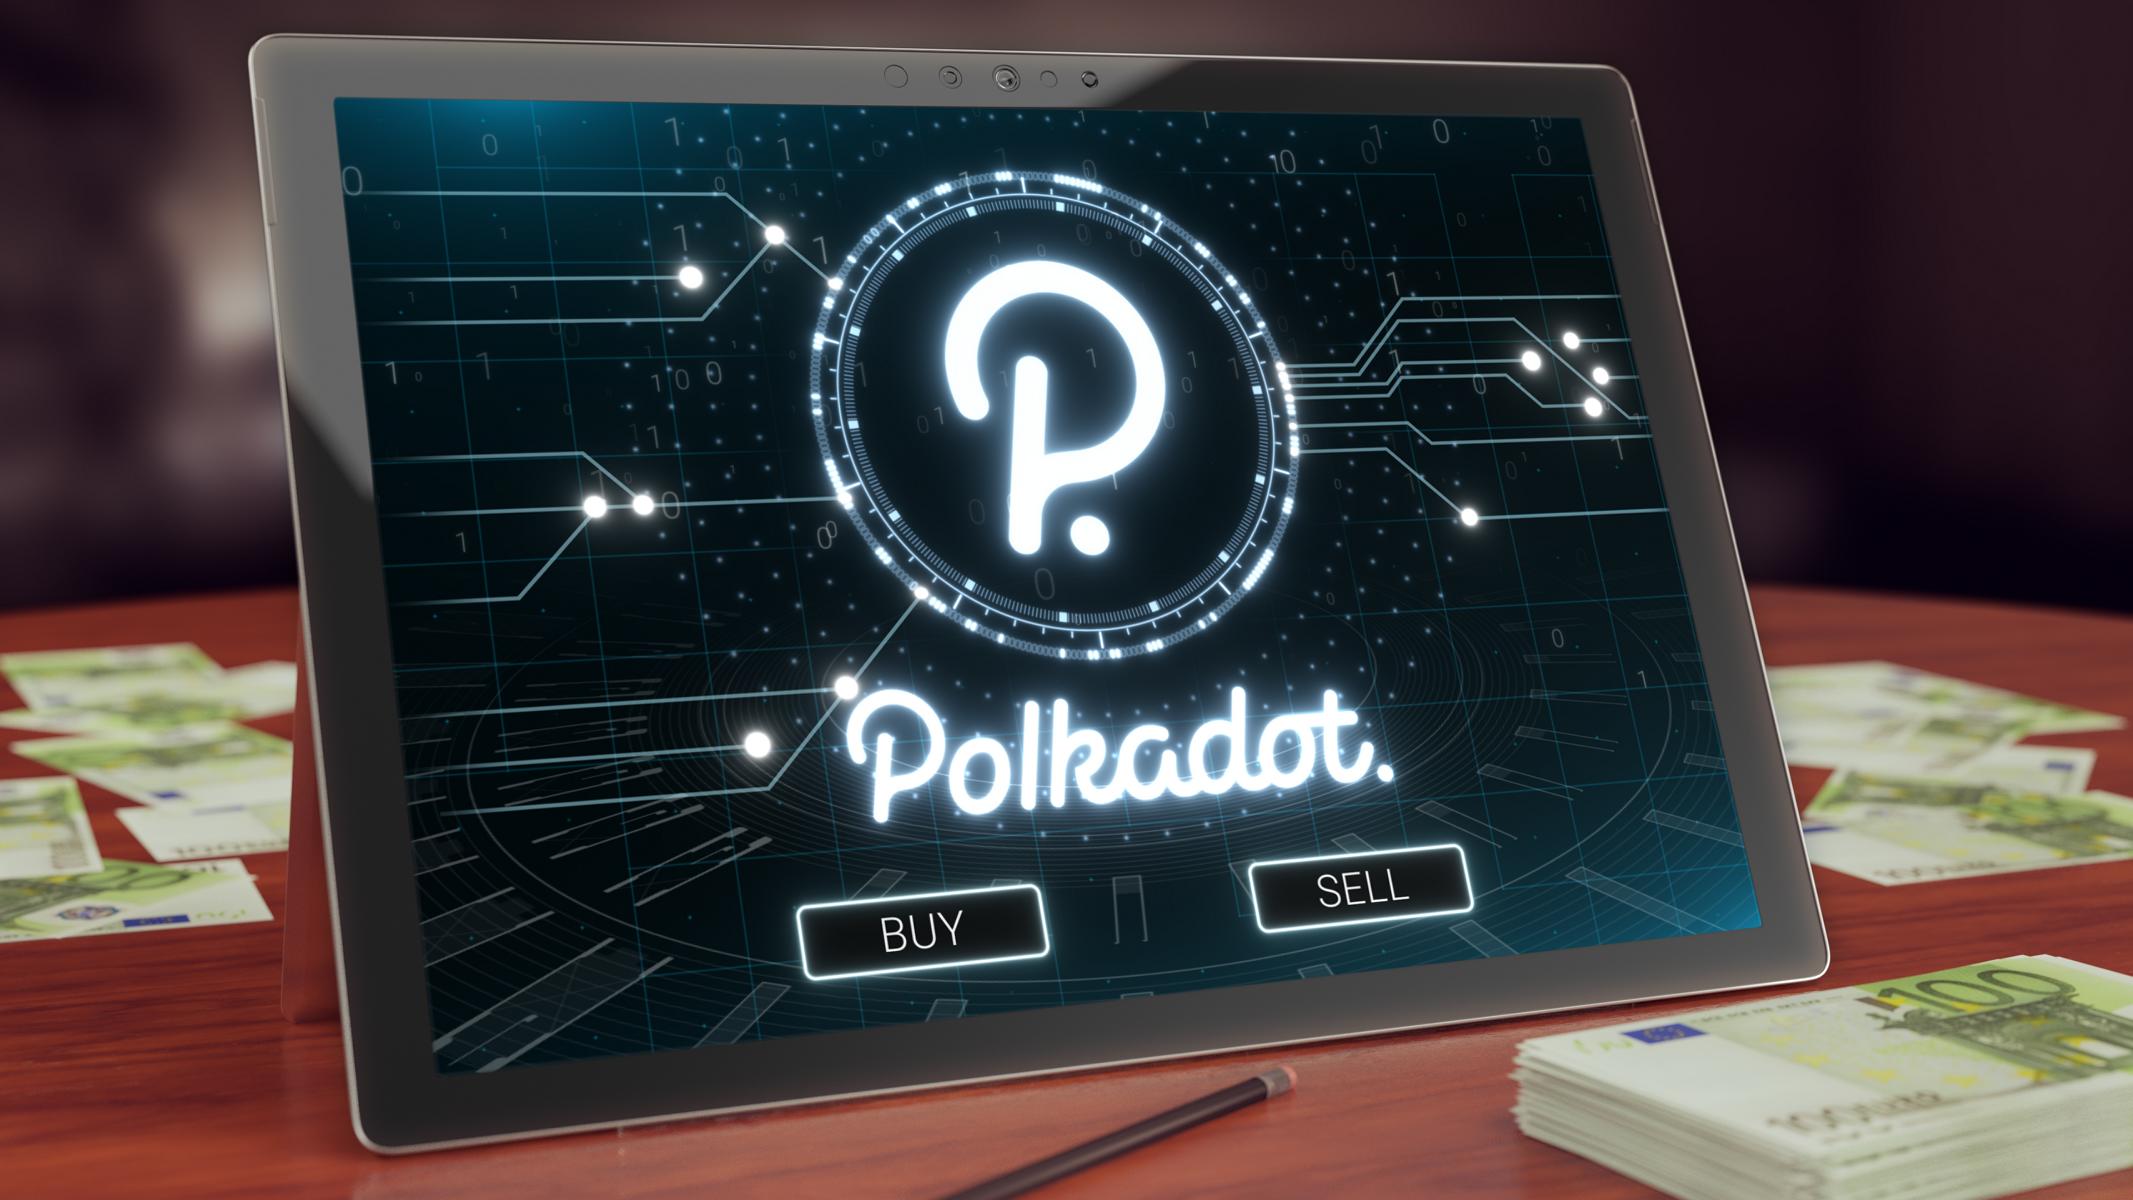 Polkadot’s $DED Meme Coin Generates Enthusiasm, Could Boost $DOT Price